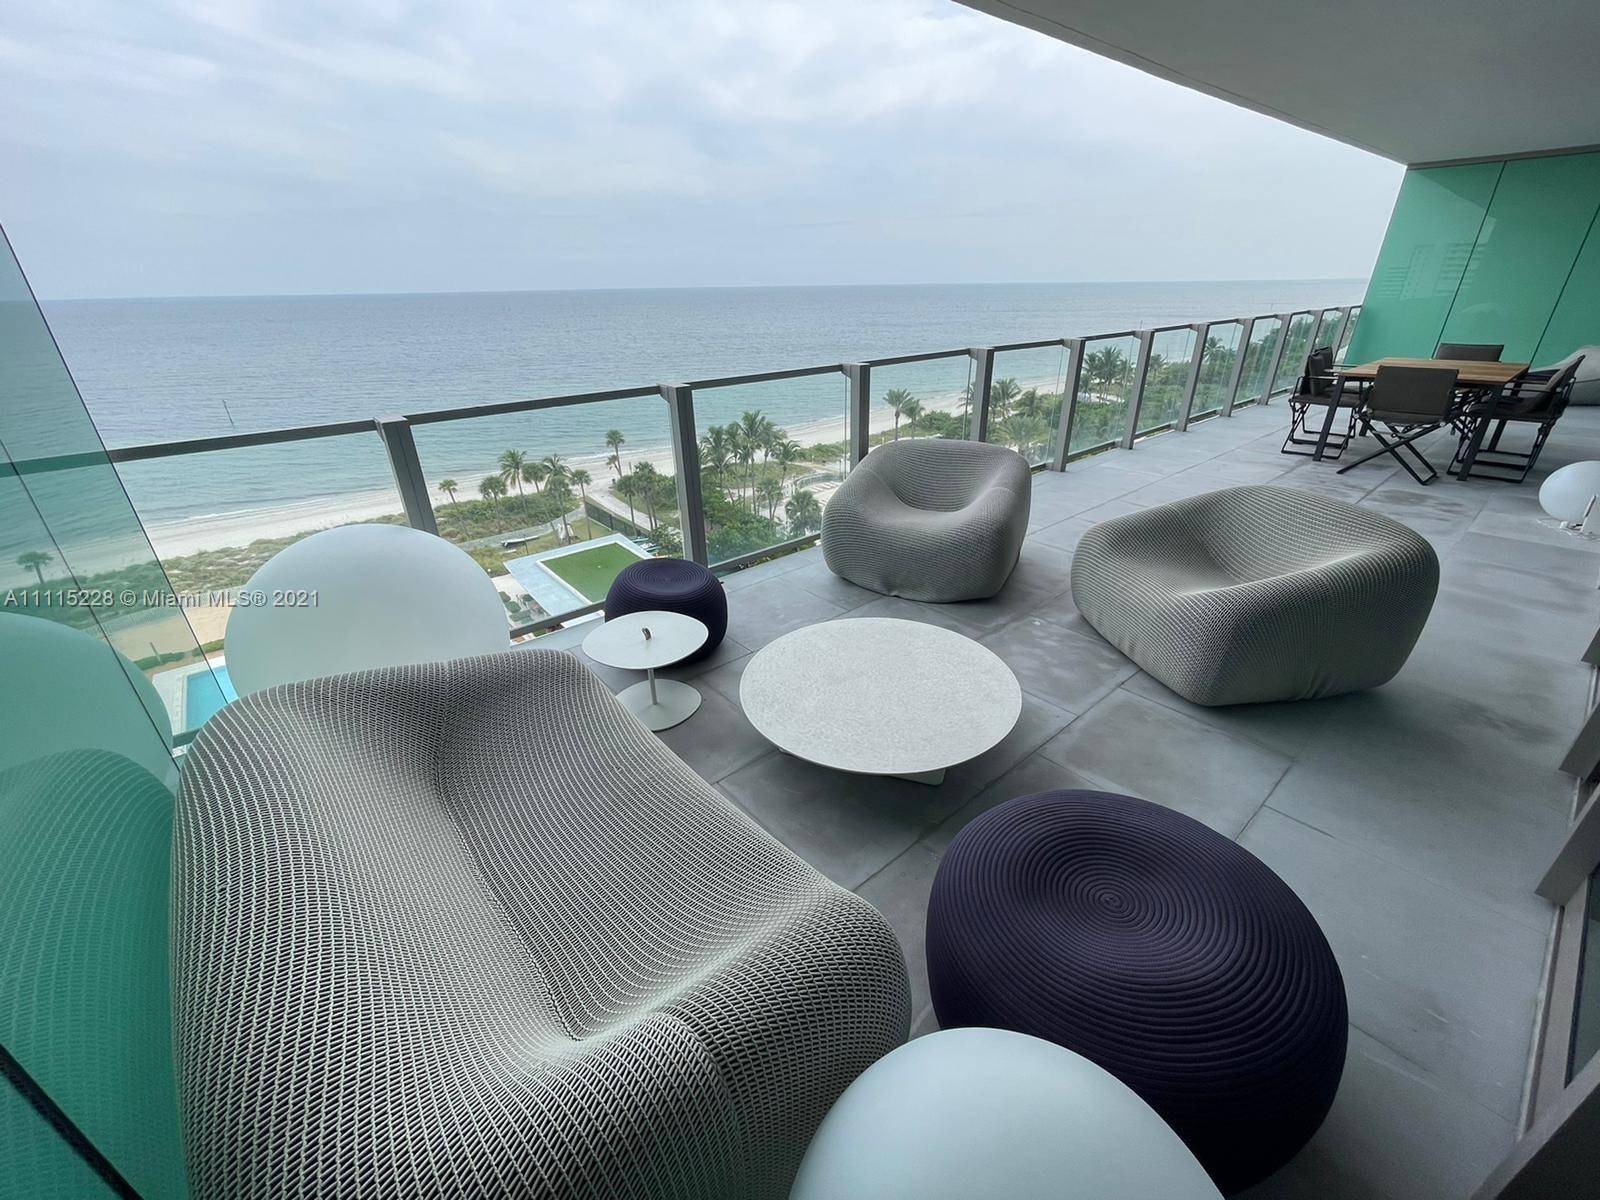 At OCEANA KEY BISCAYNE you will enjoy the luxurious beach and sea lifestyle while being close to vibrant Miami, South Beach, Wynwood, Design District.